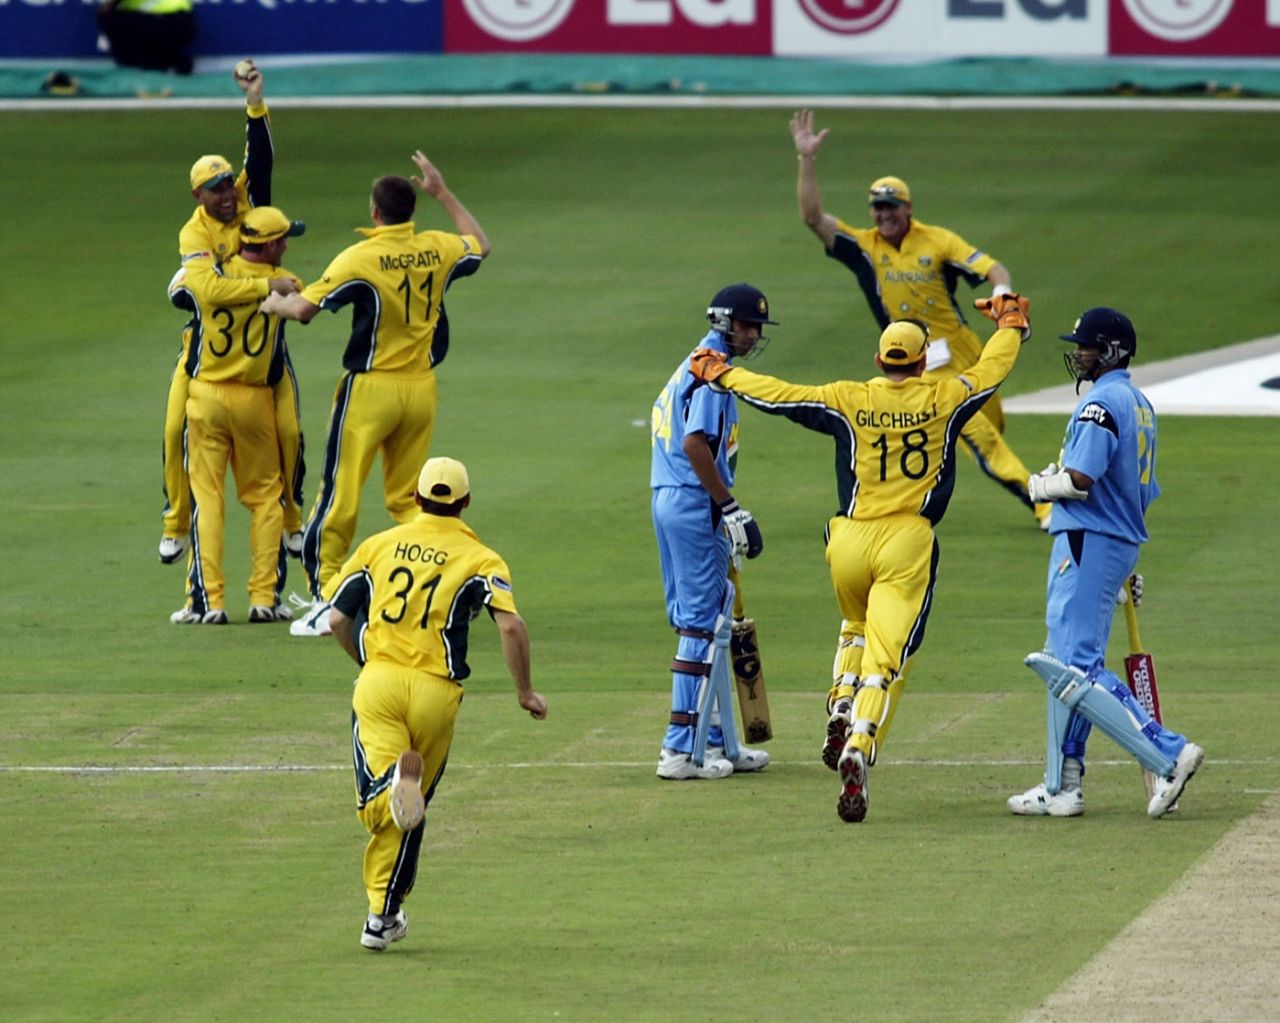 Australia celebrate their moment of victory: Zaheer Khan's wicket, Australia v India, World Cup 2003, final, Johannesburg, March 23, 2003